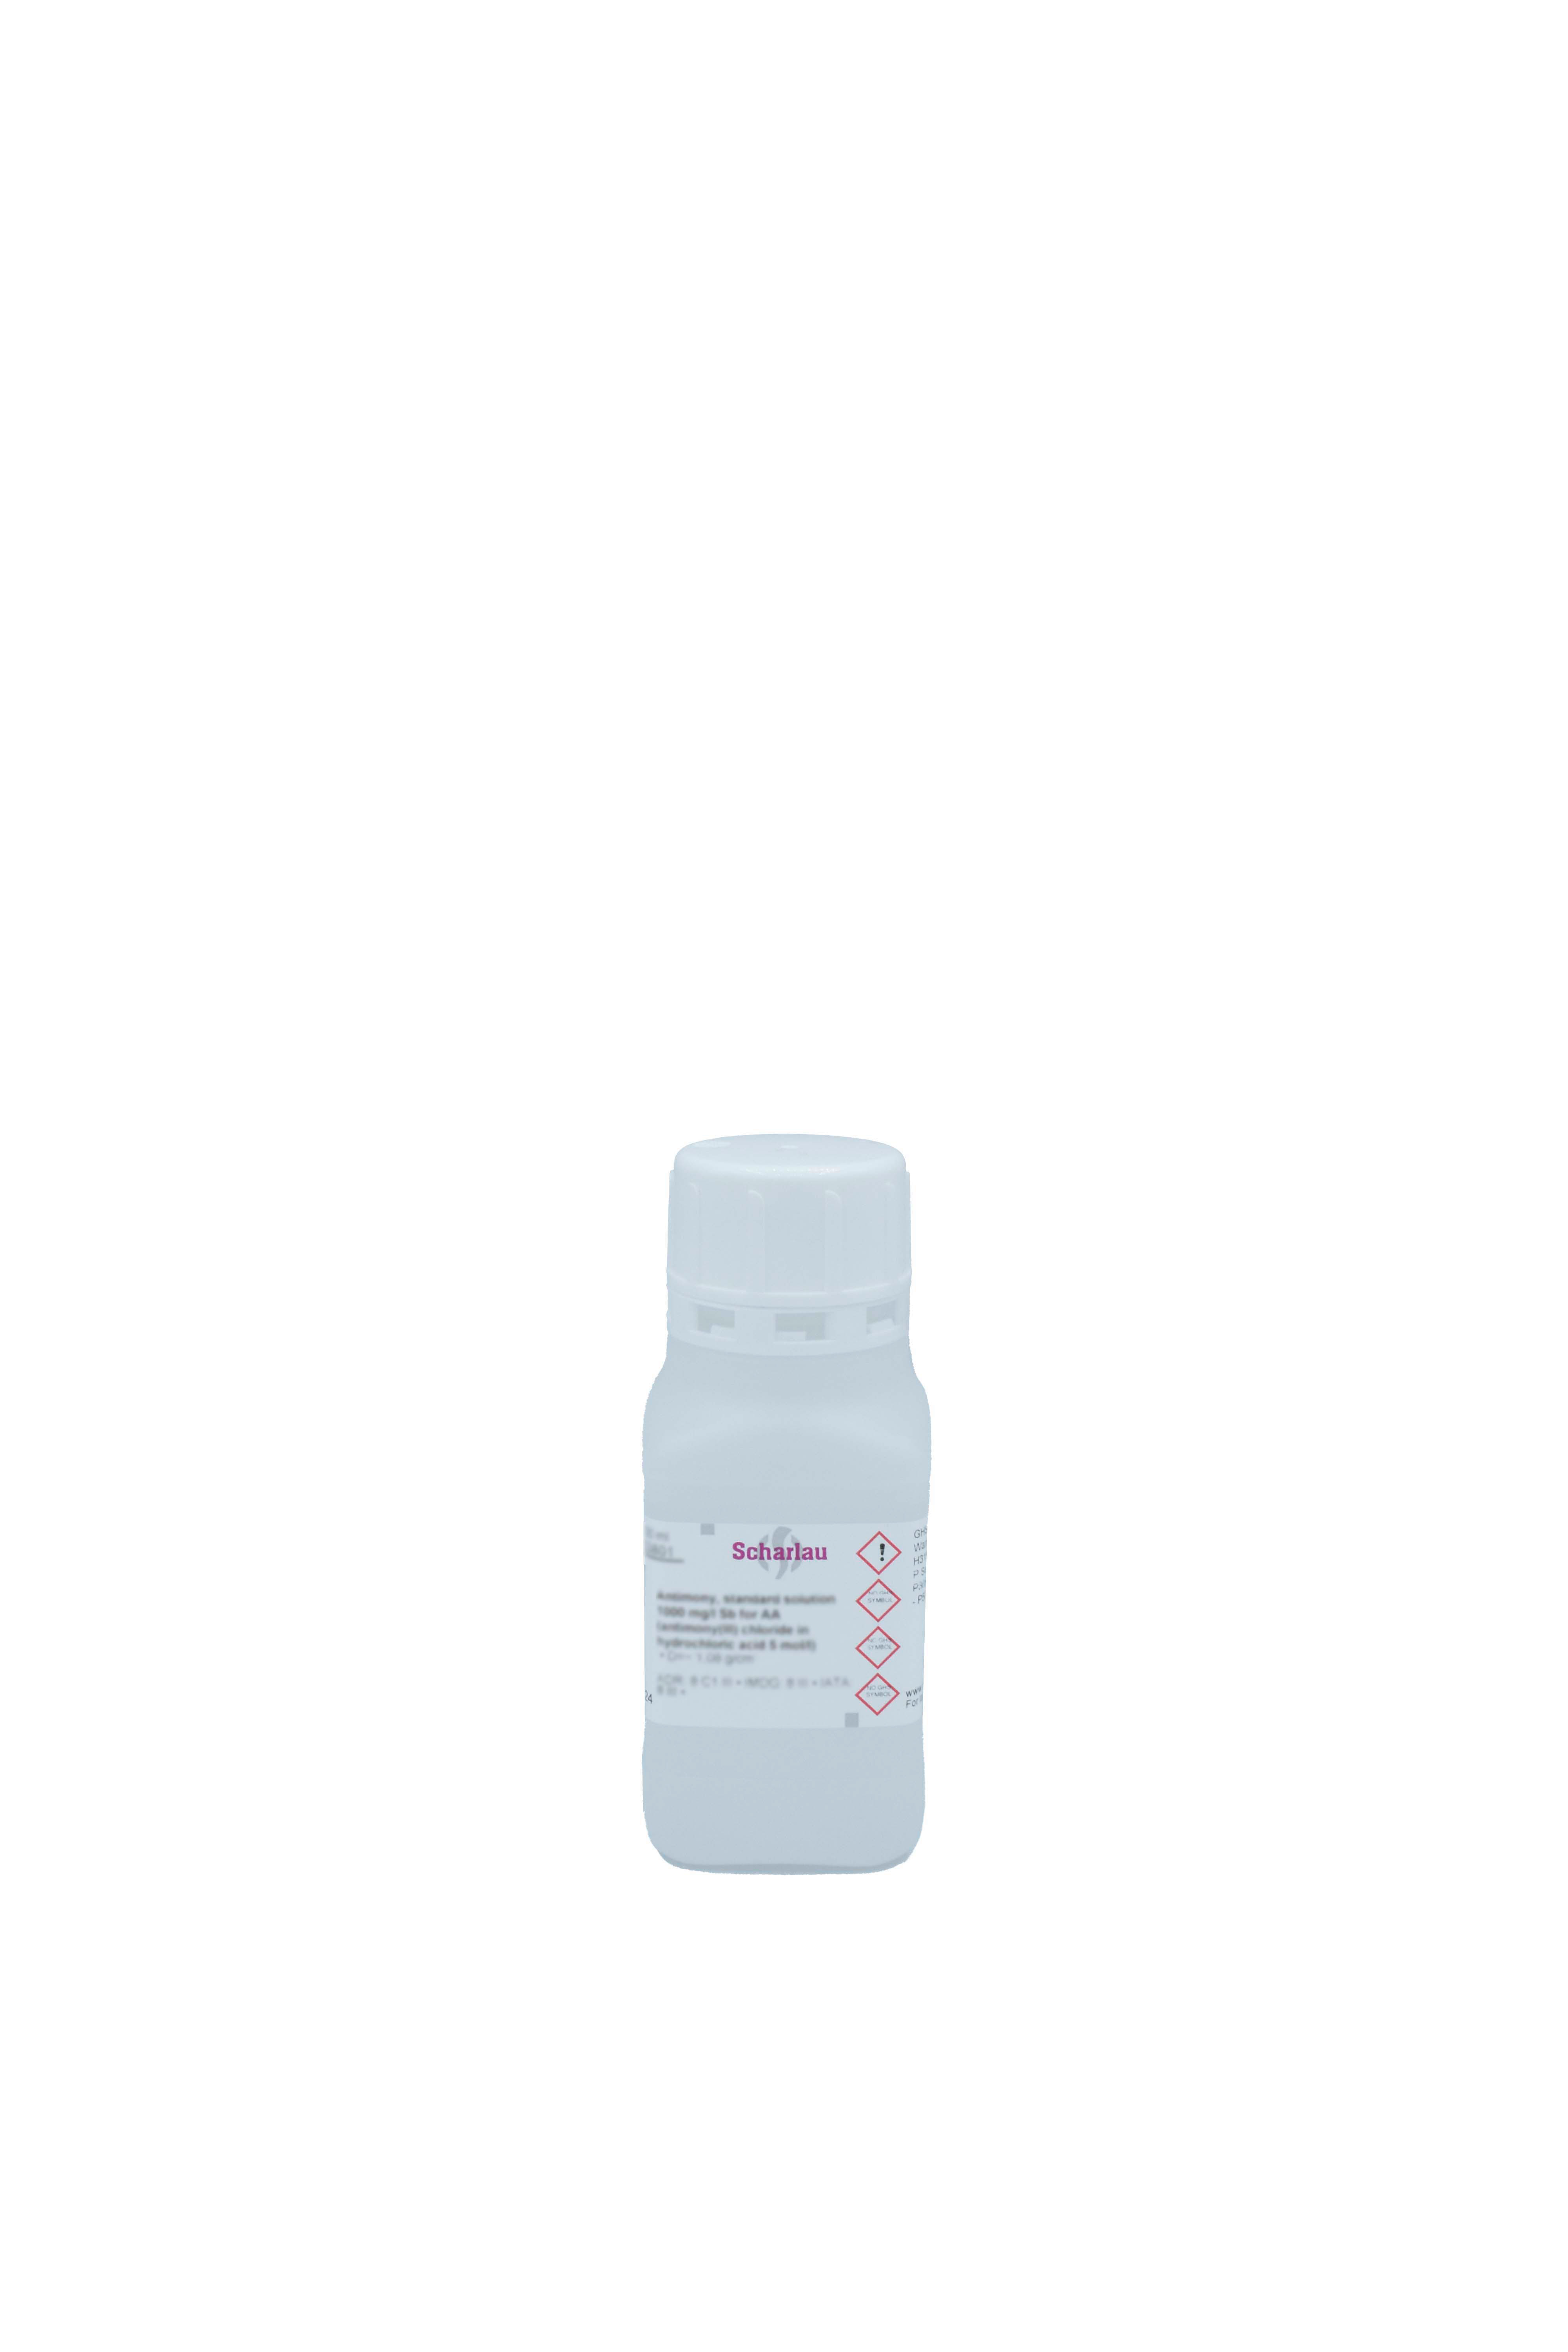 Mercury, standard solution 1000 mg/l Hg for AAsS (mercury(II) nitrate monohydrate in HNO3 2 mol/l)